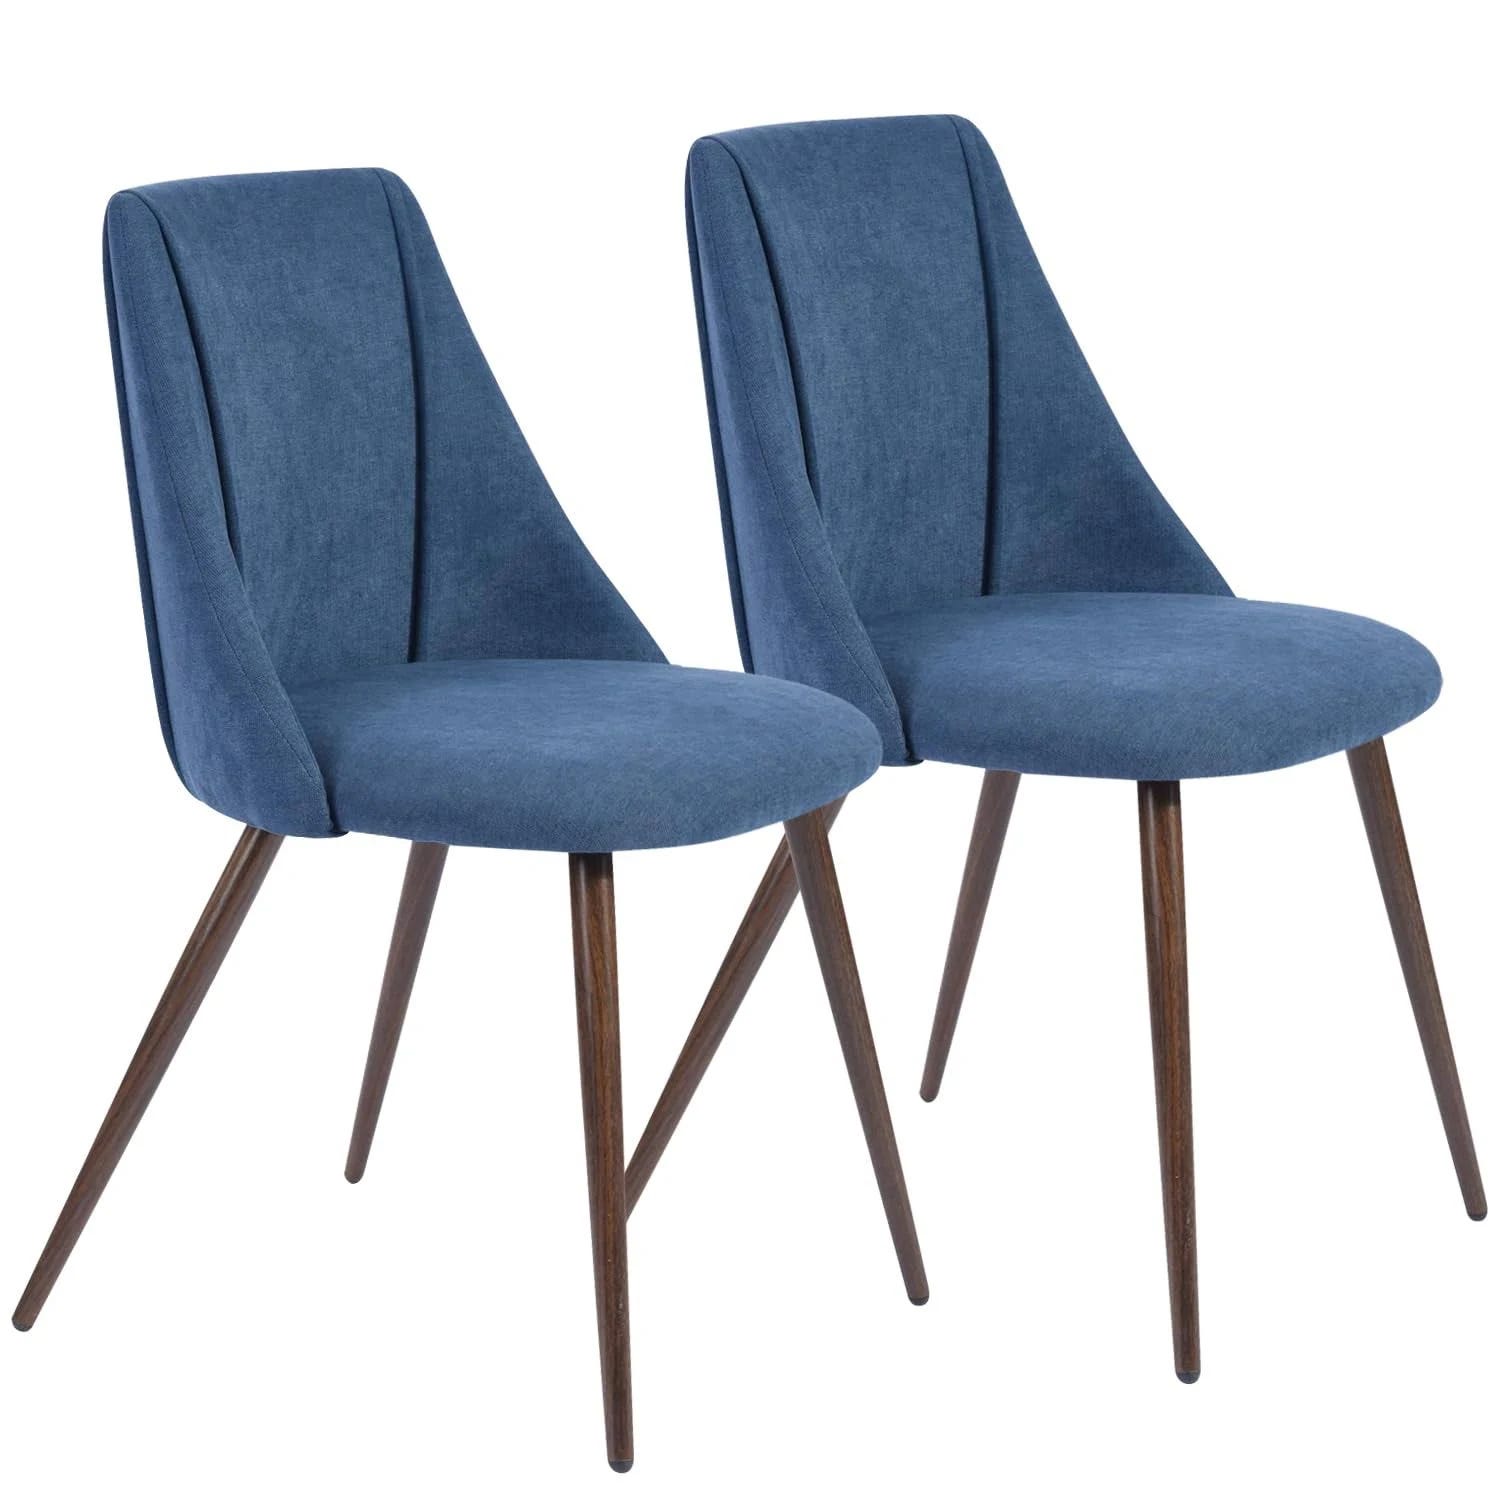 Modern Upholstered Kitchen Dining Chair Set of 2 | Image